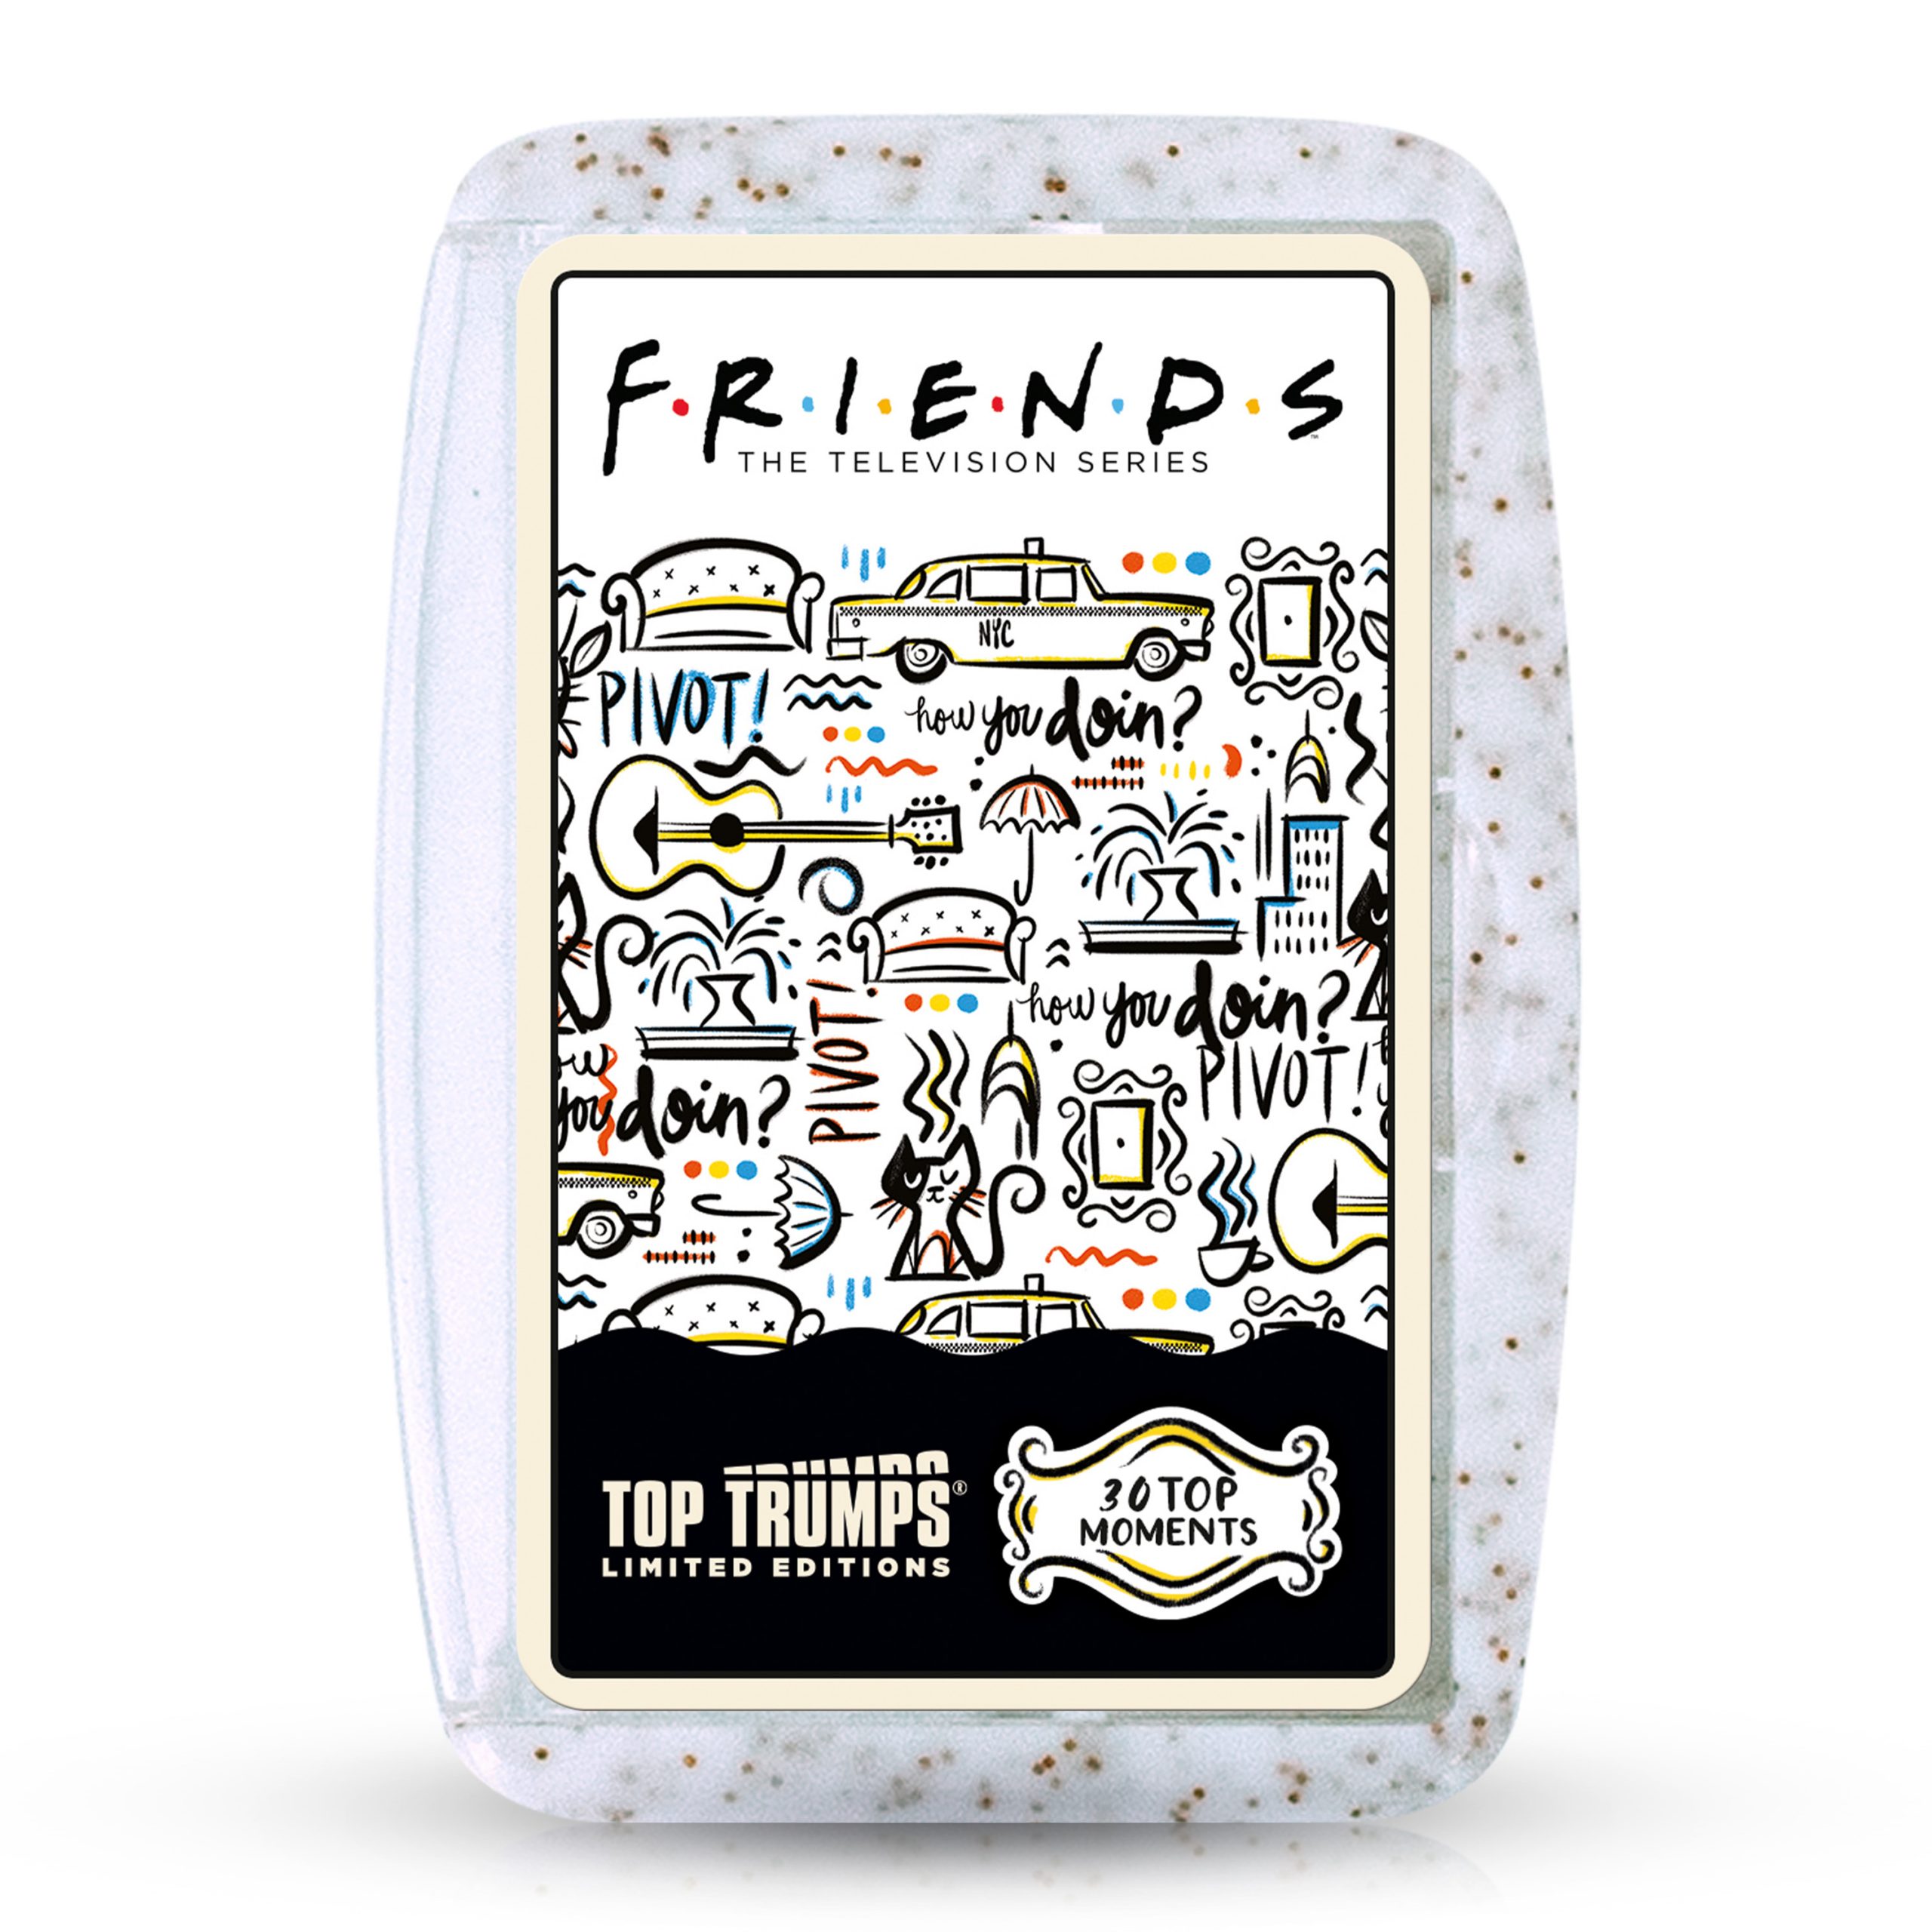 Friends Top Trumps Limited Edition